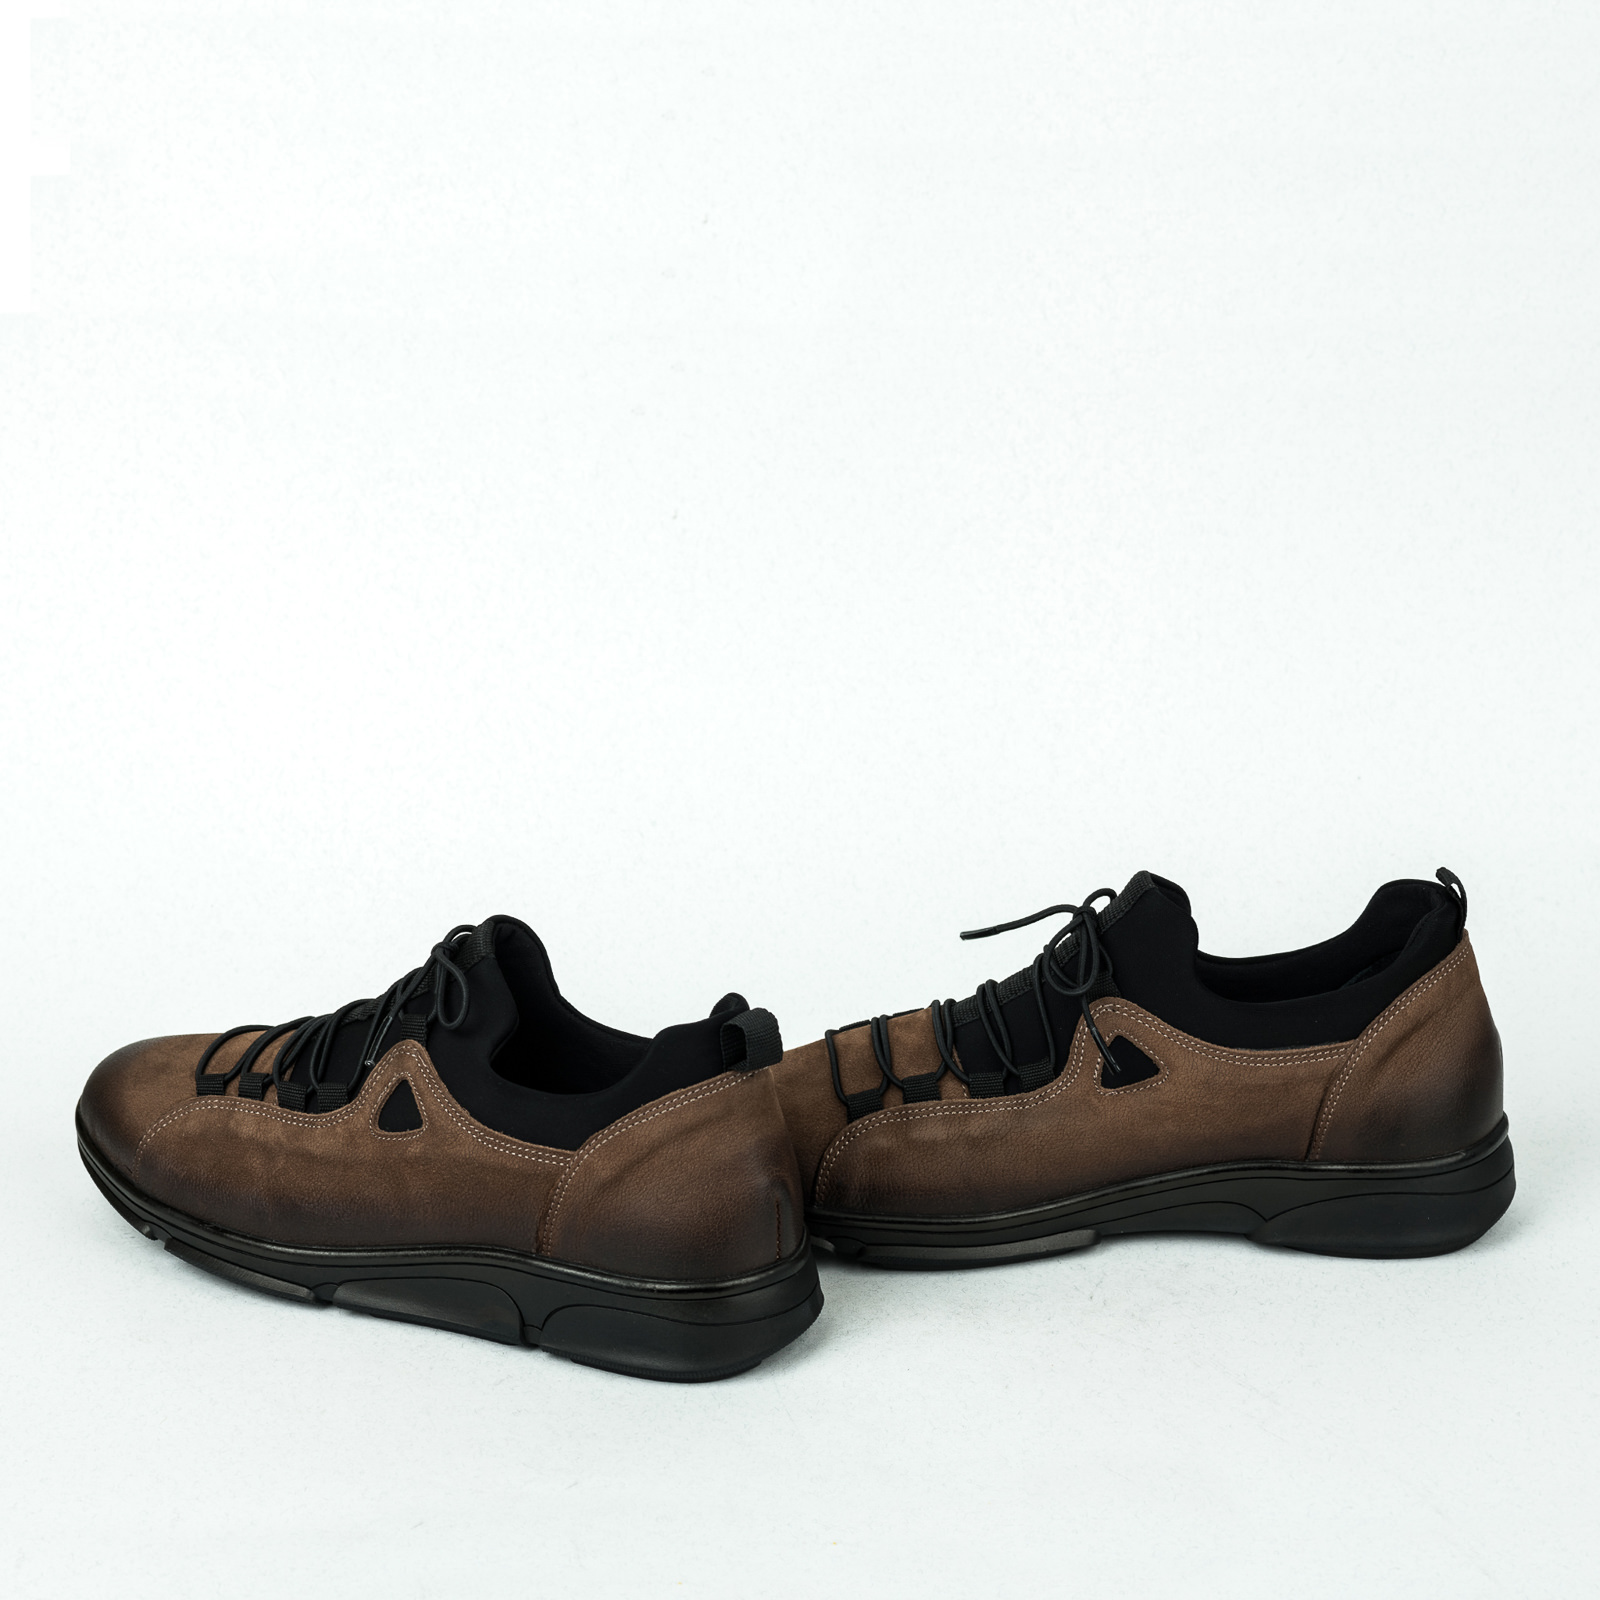 Leather shoes & flats MORI - BROWN